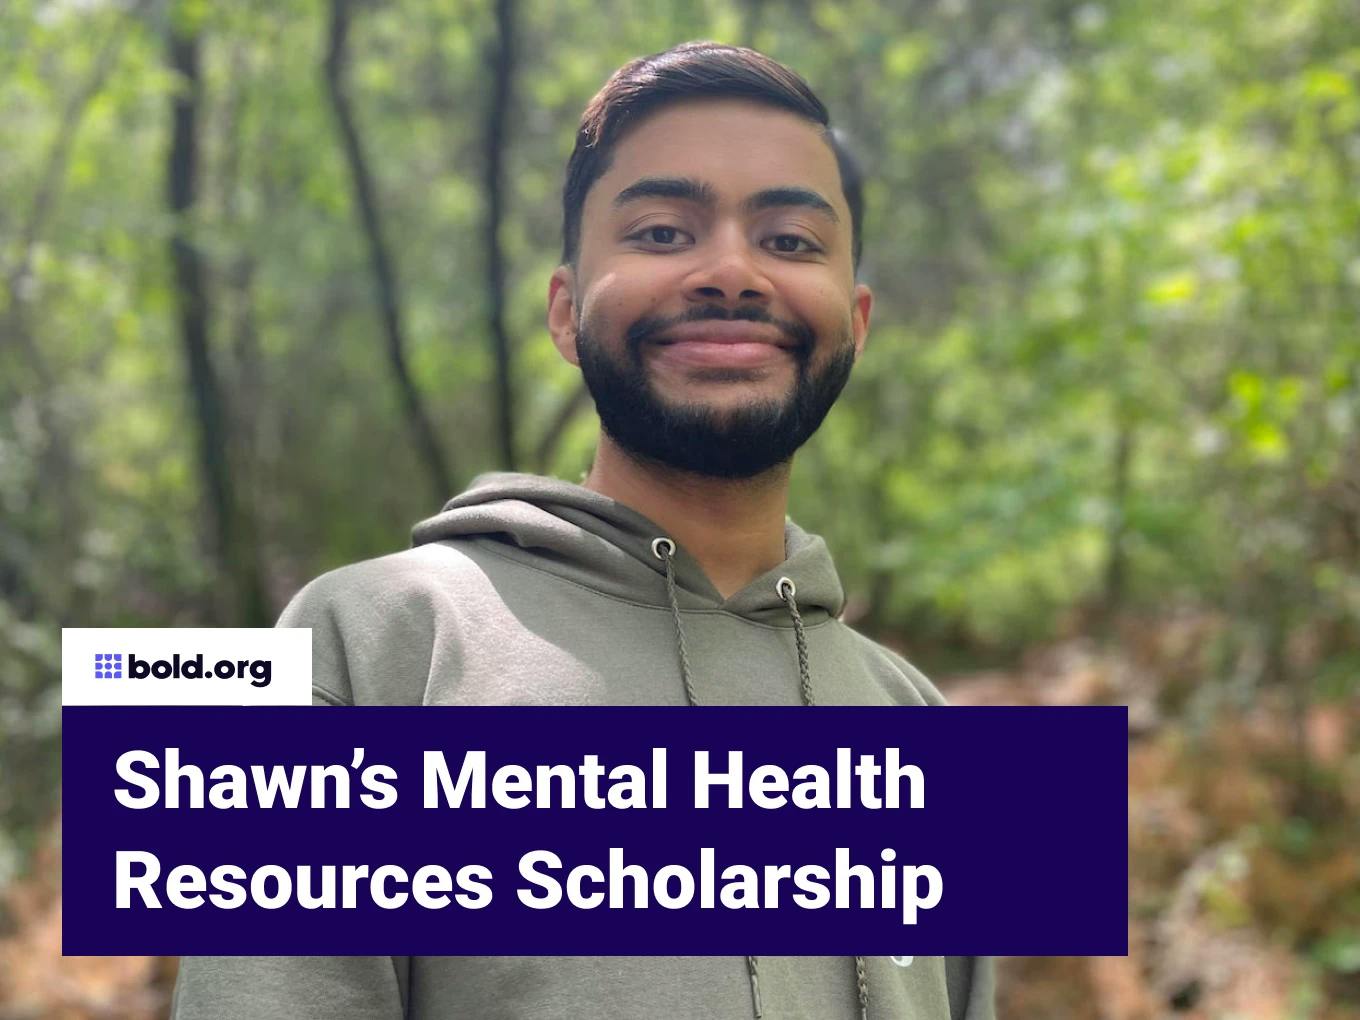 Shawn’s Mental Health Resources Scholarship